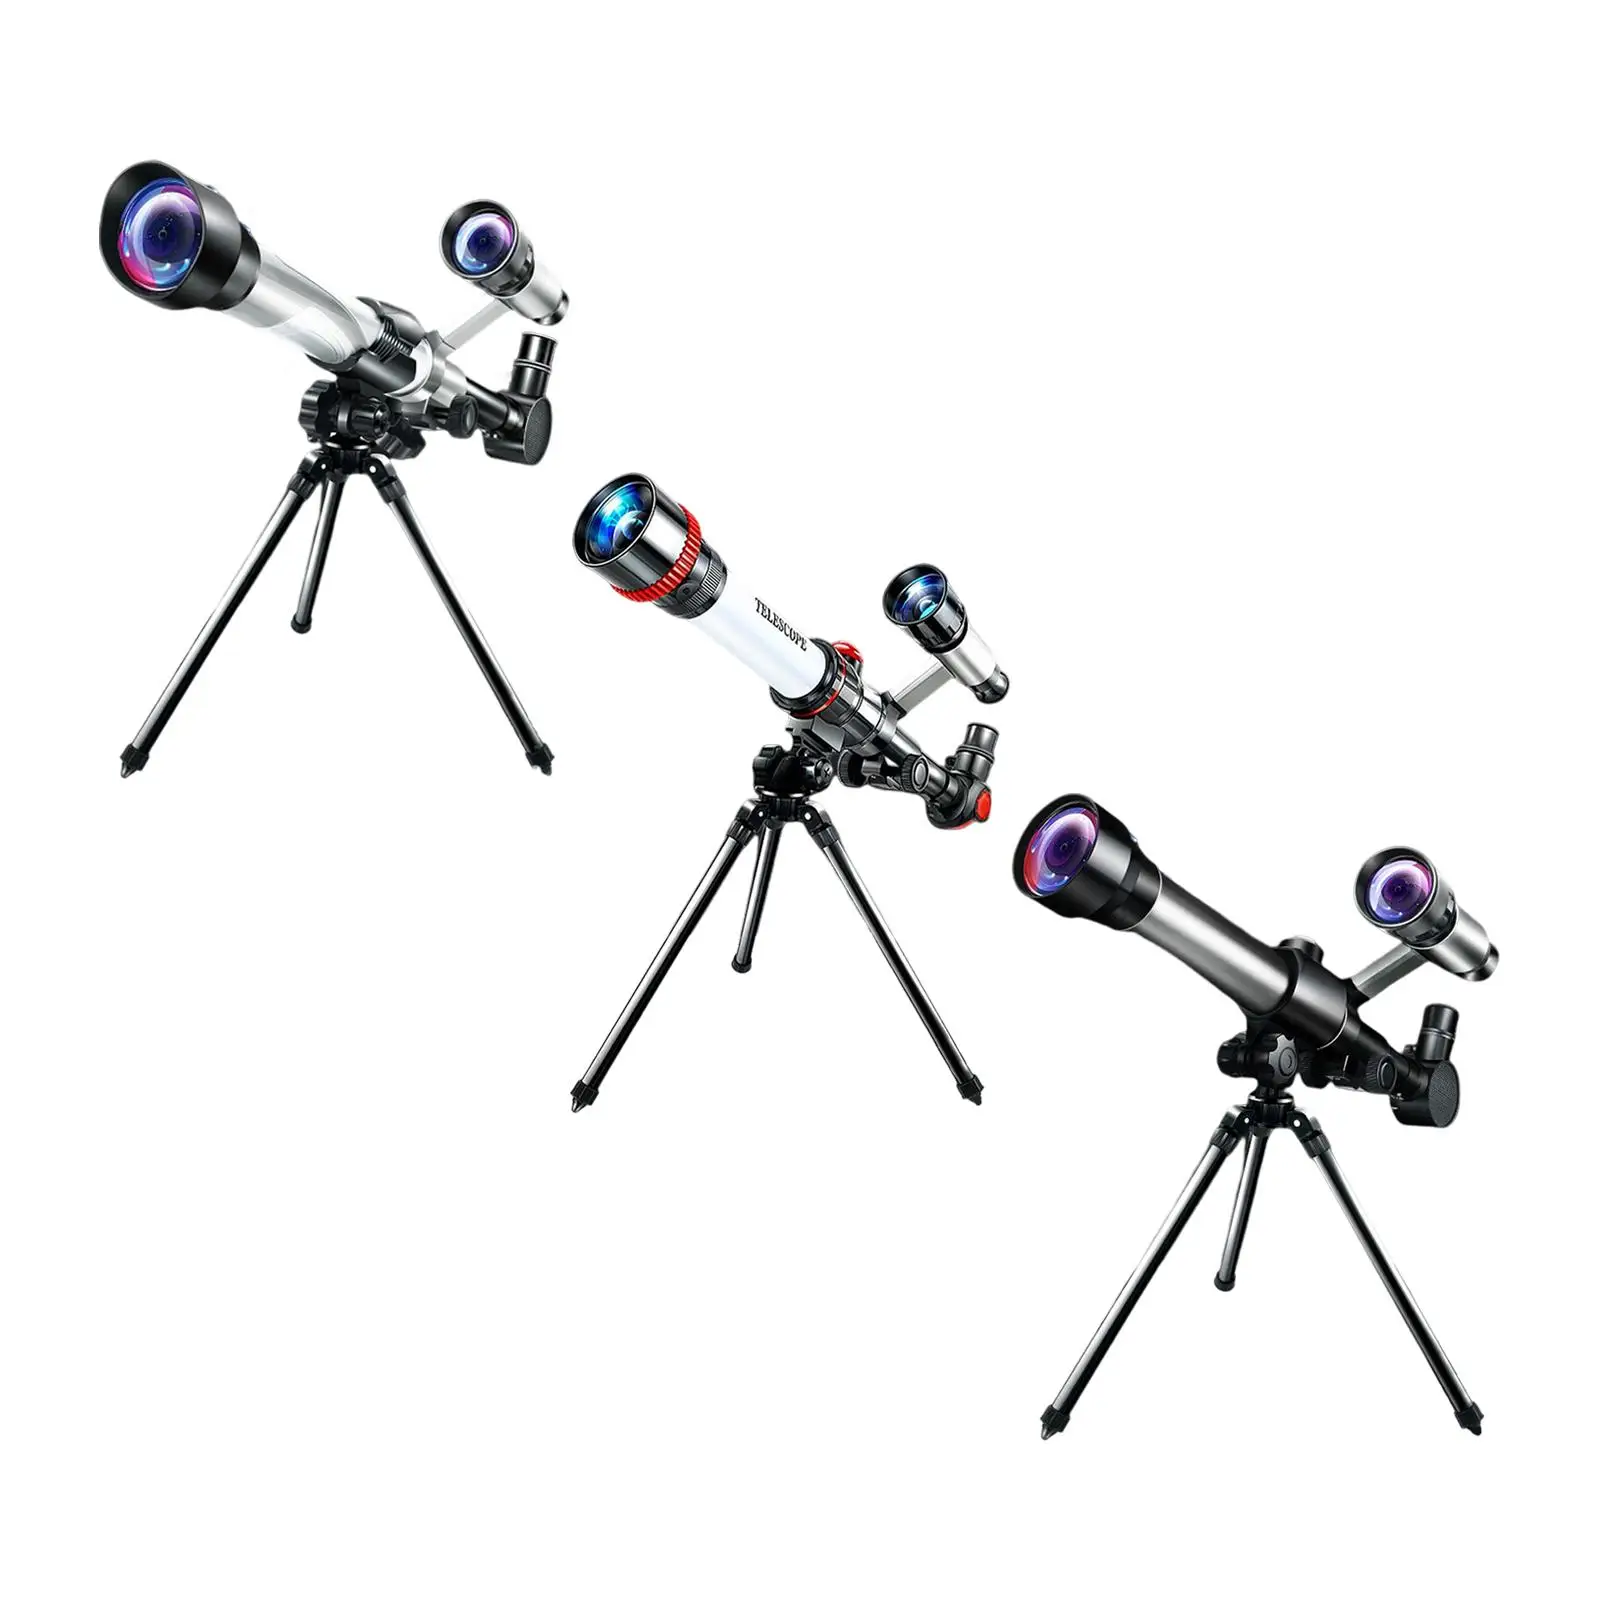 60mm Caliber Telescope with Finder Scope for Beginners Accessory ,to Observe Celestial Objects AT Night